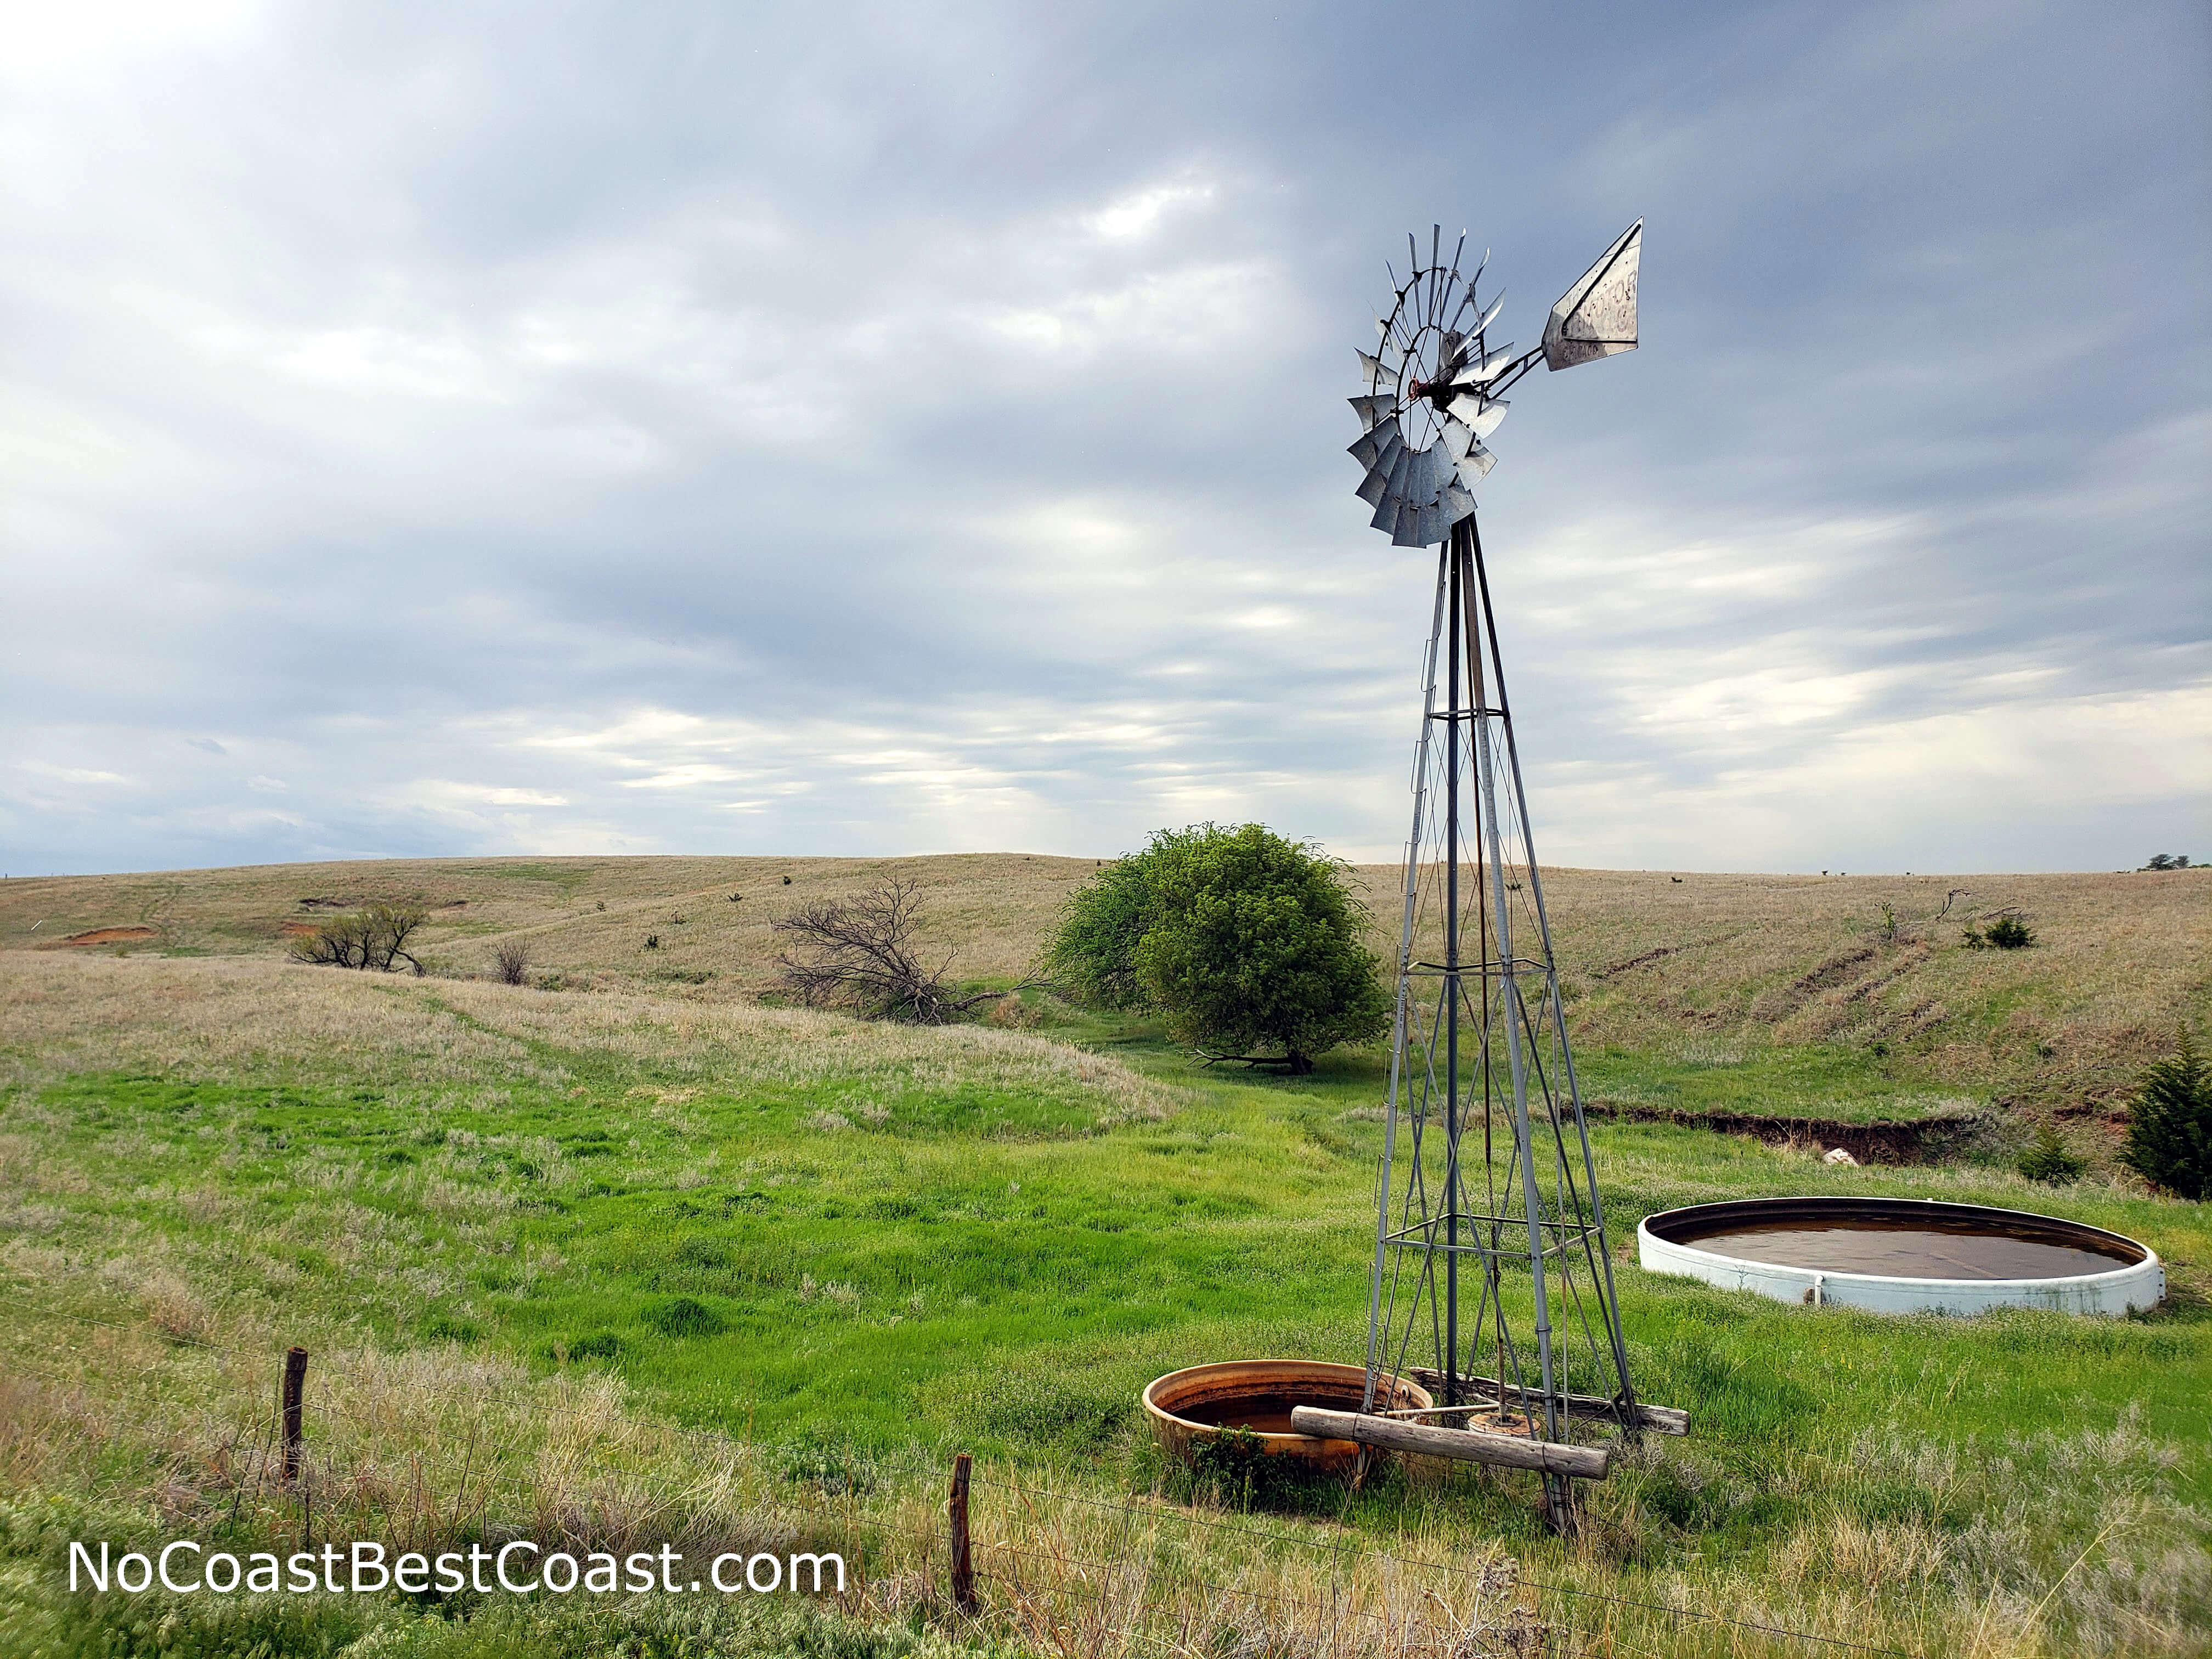 A very Kansas scene of windmill and rolling prairie